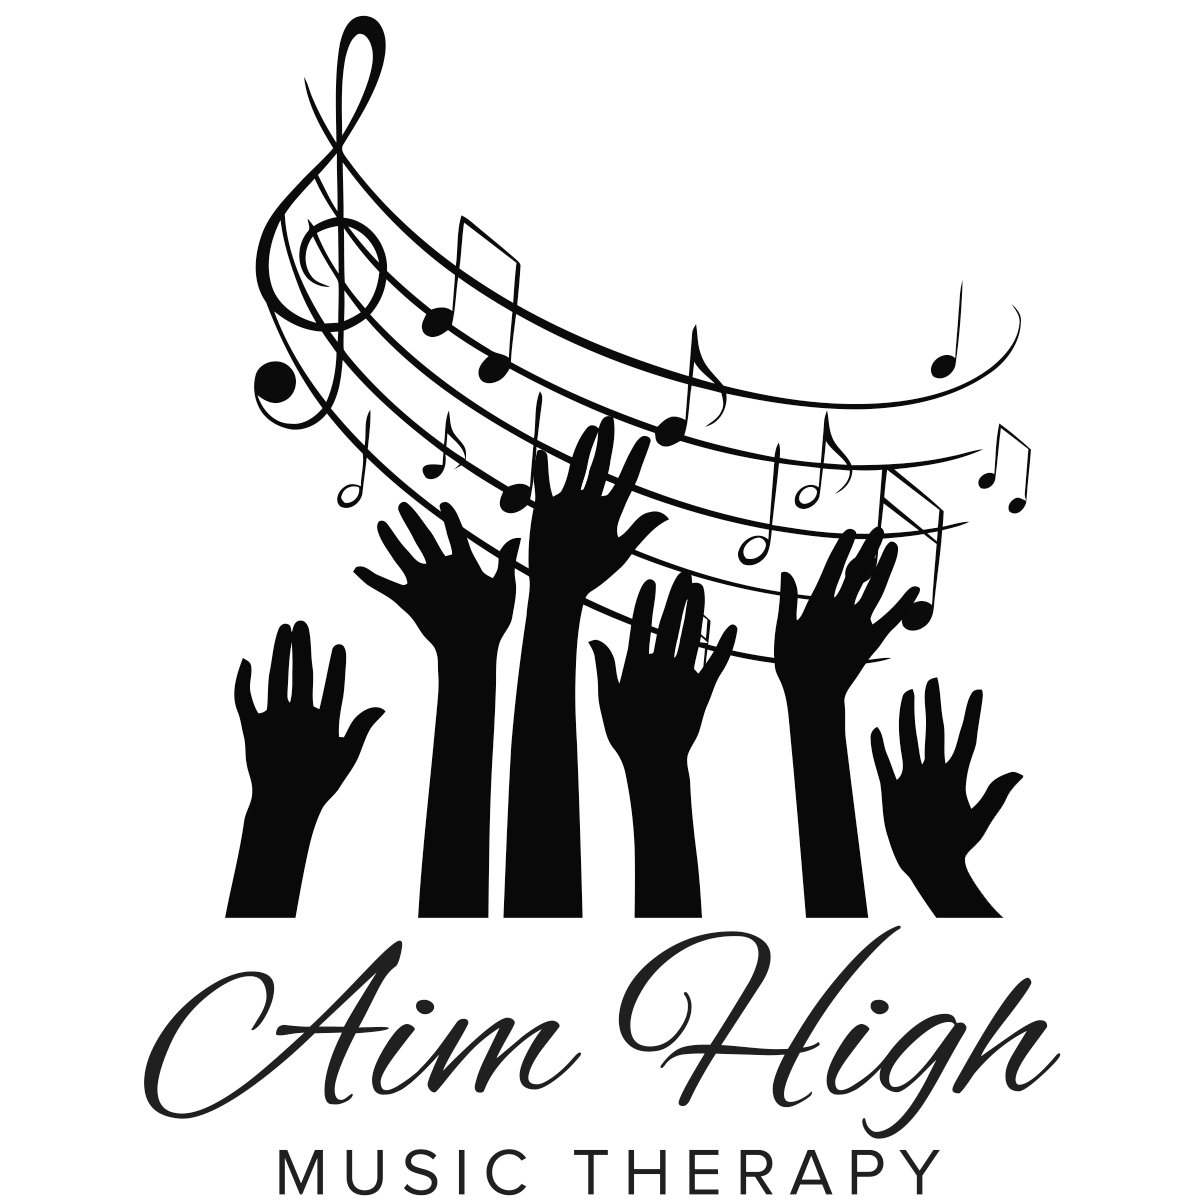 Aim High Music Therapy is a private practice based in South Jordan, UT. We use music to help people achieve their goals.